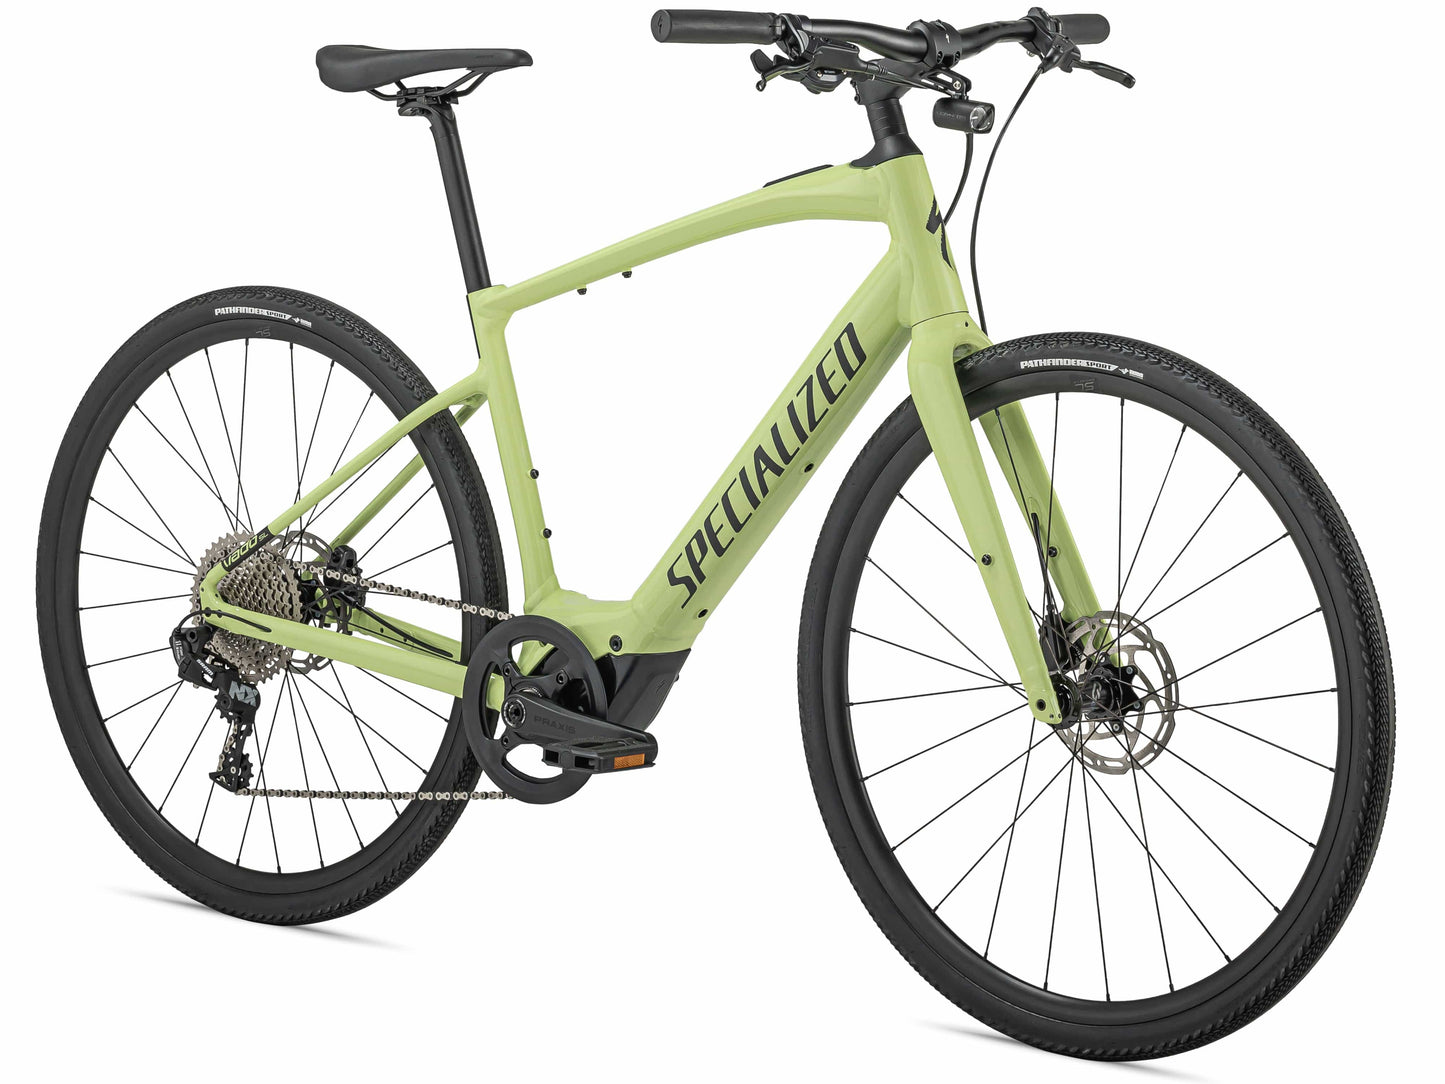 Specialized Turbo Vado SL 4.0 ebike limestone front side view on Fly Rides